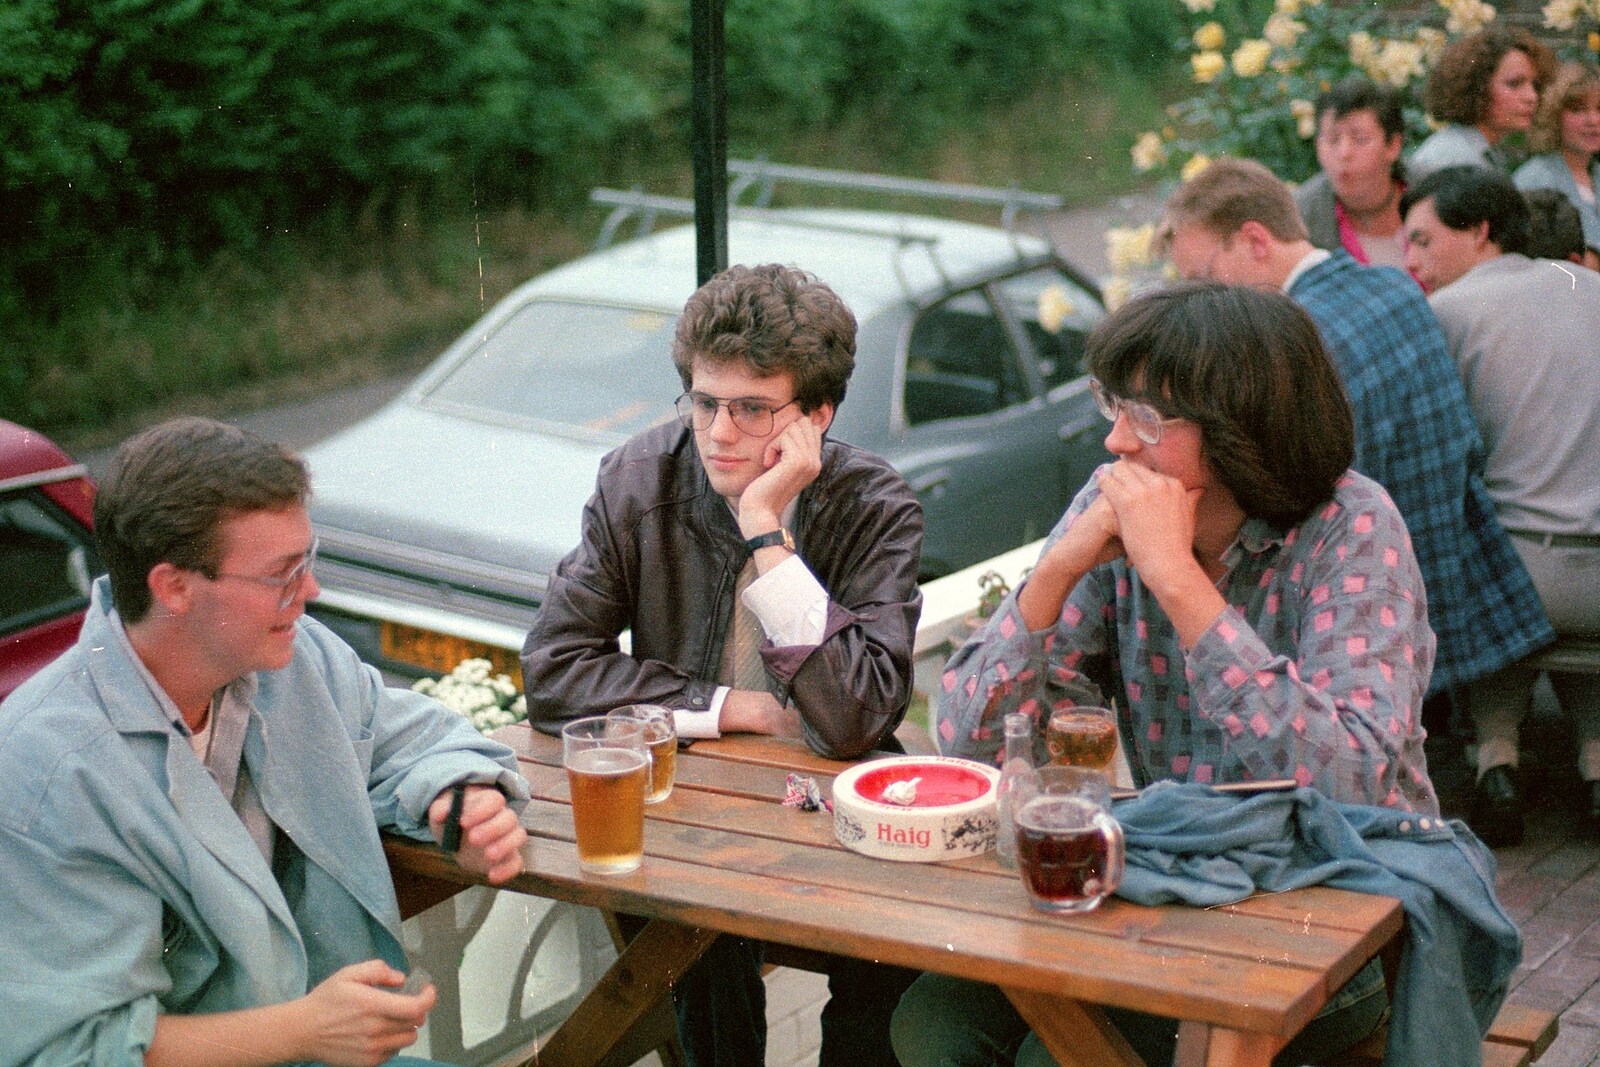 Dave Lock and his mates at a pub somewhere from A Trip to Groombridge, Kent - 10th July 1986